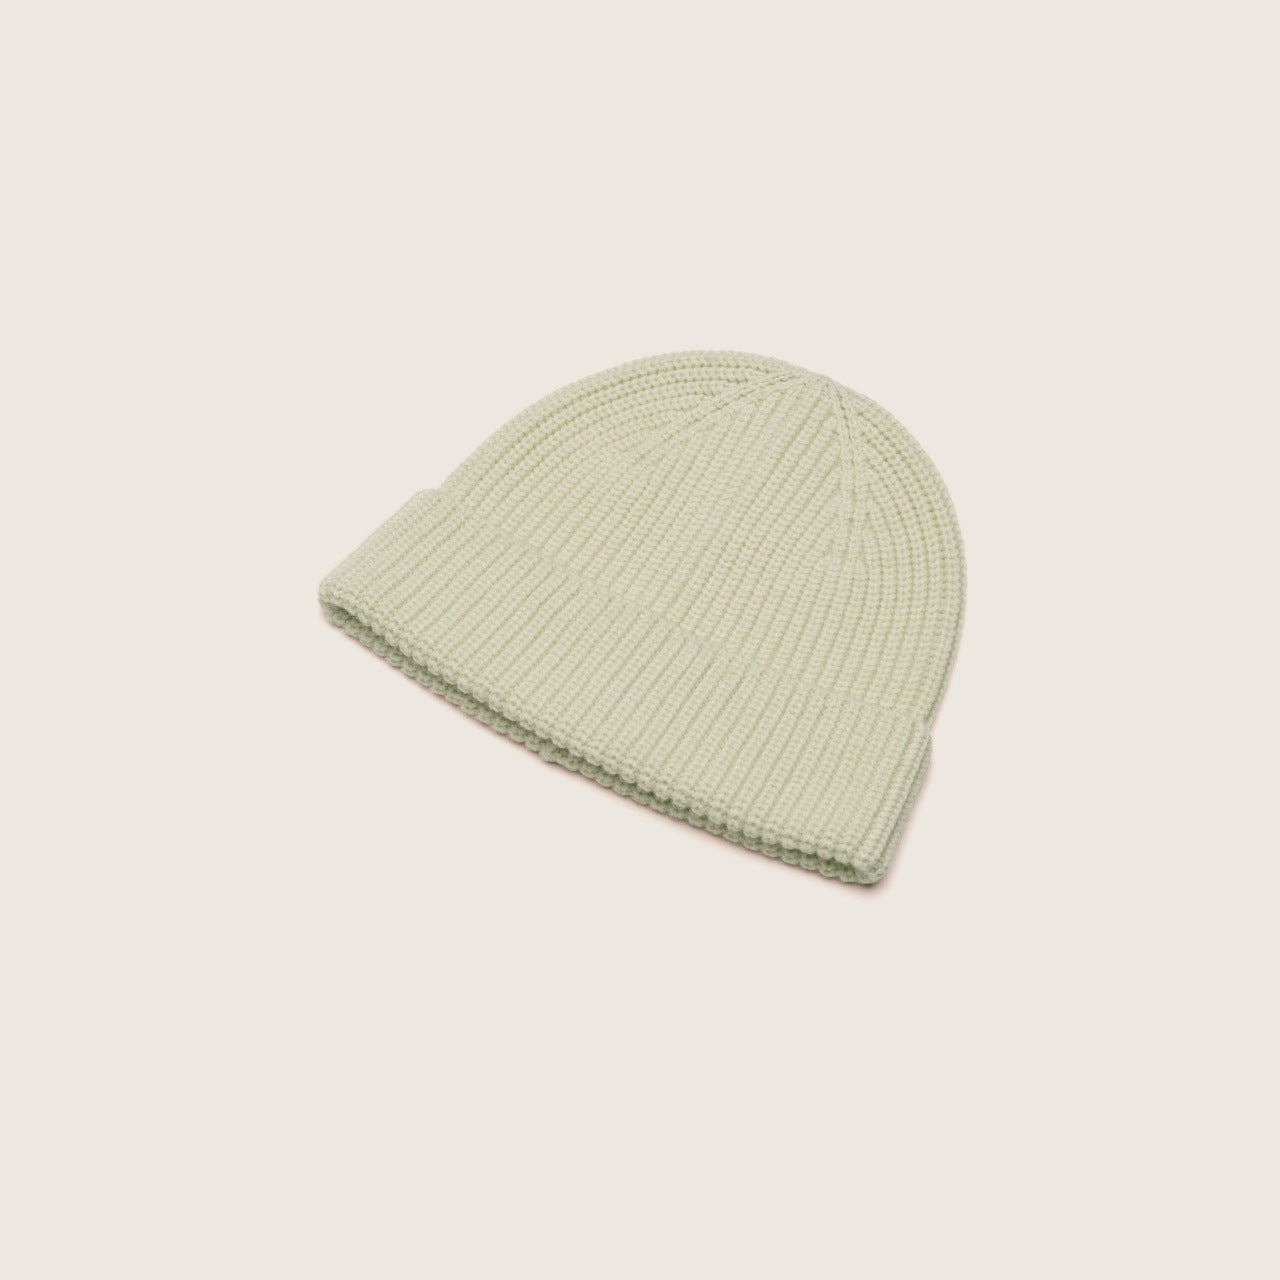 Product image of the Bambi Sage Green knit beanie